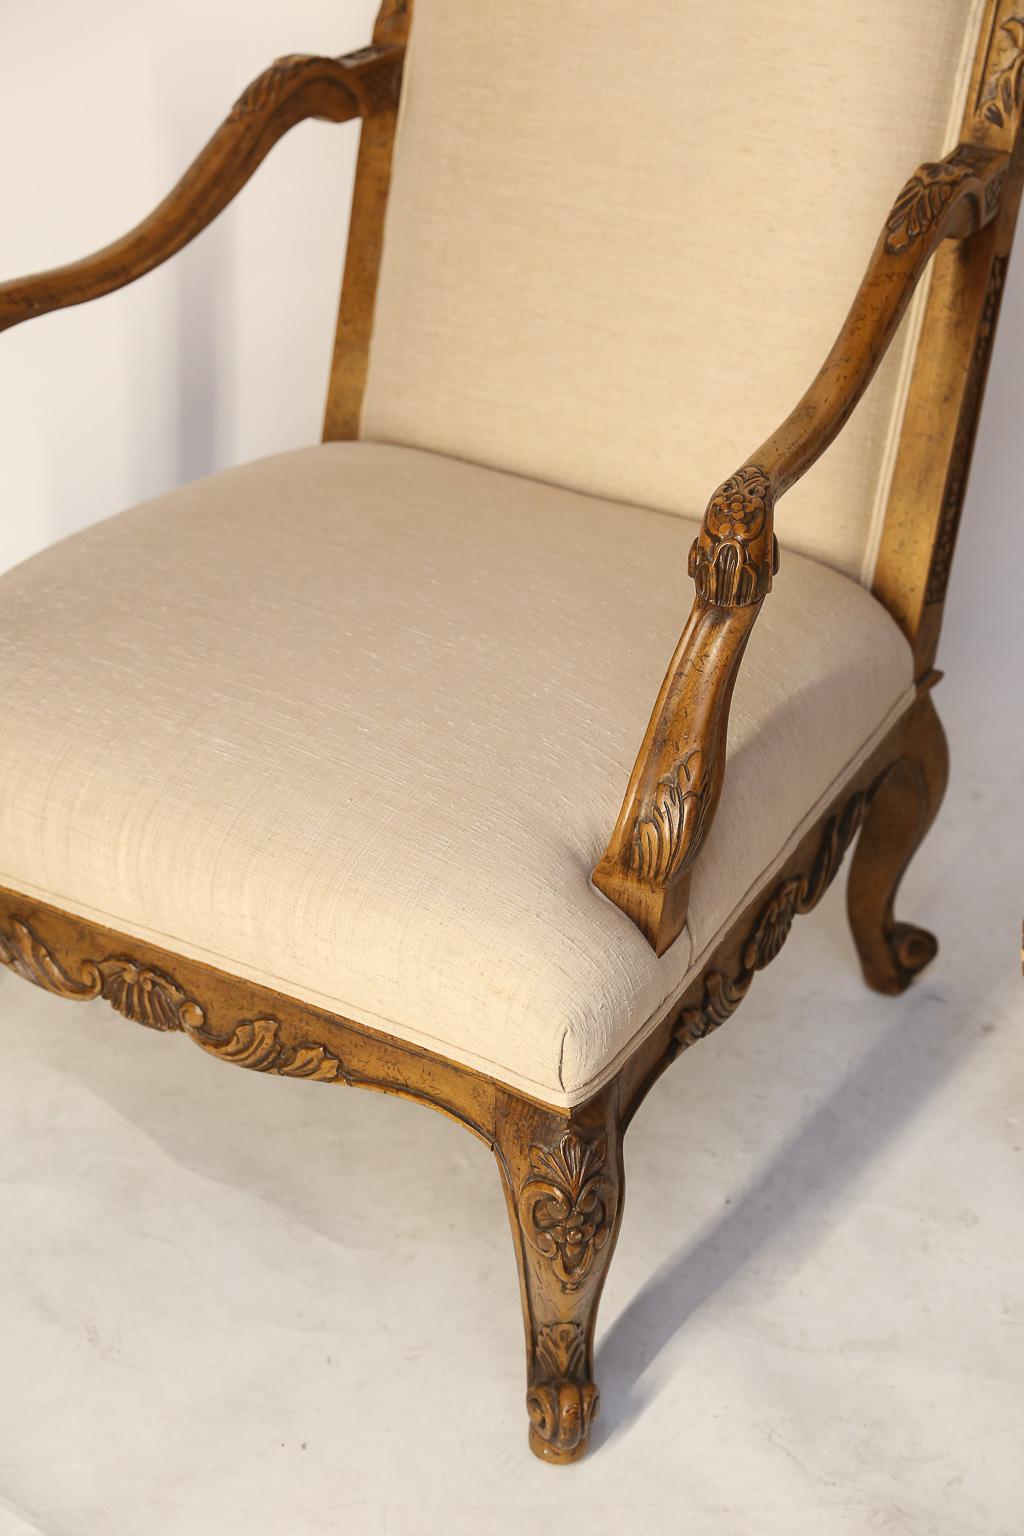 Pair of vintage Baker Furniture French Regence-style fauteuil chairs, from Spain, have a fruitwood finish, done in Grand Rapids, Michigan. 
The shape is very unusual and the finish is quite rich, plus they are extremely comfortable due to the pitch